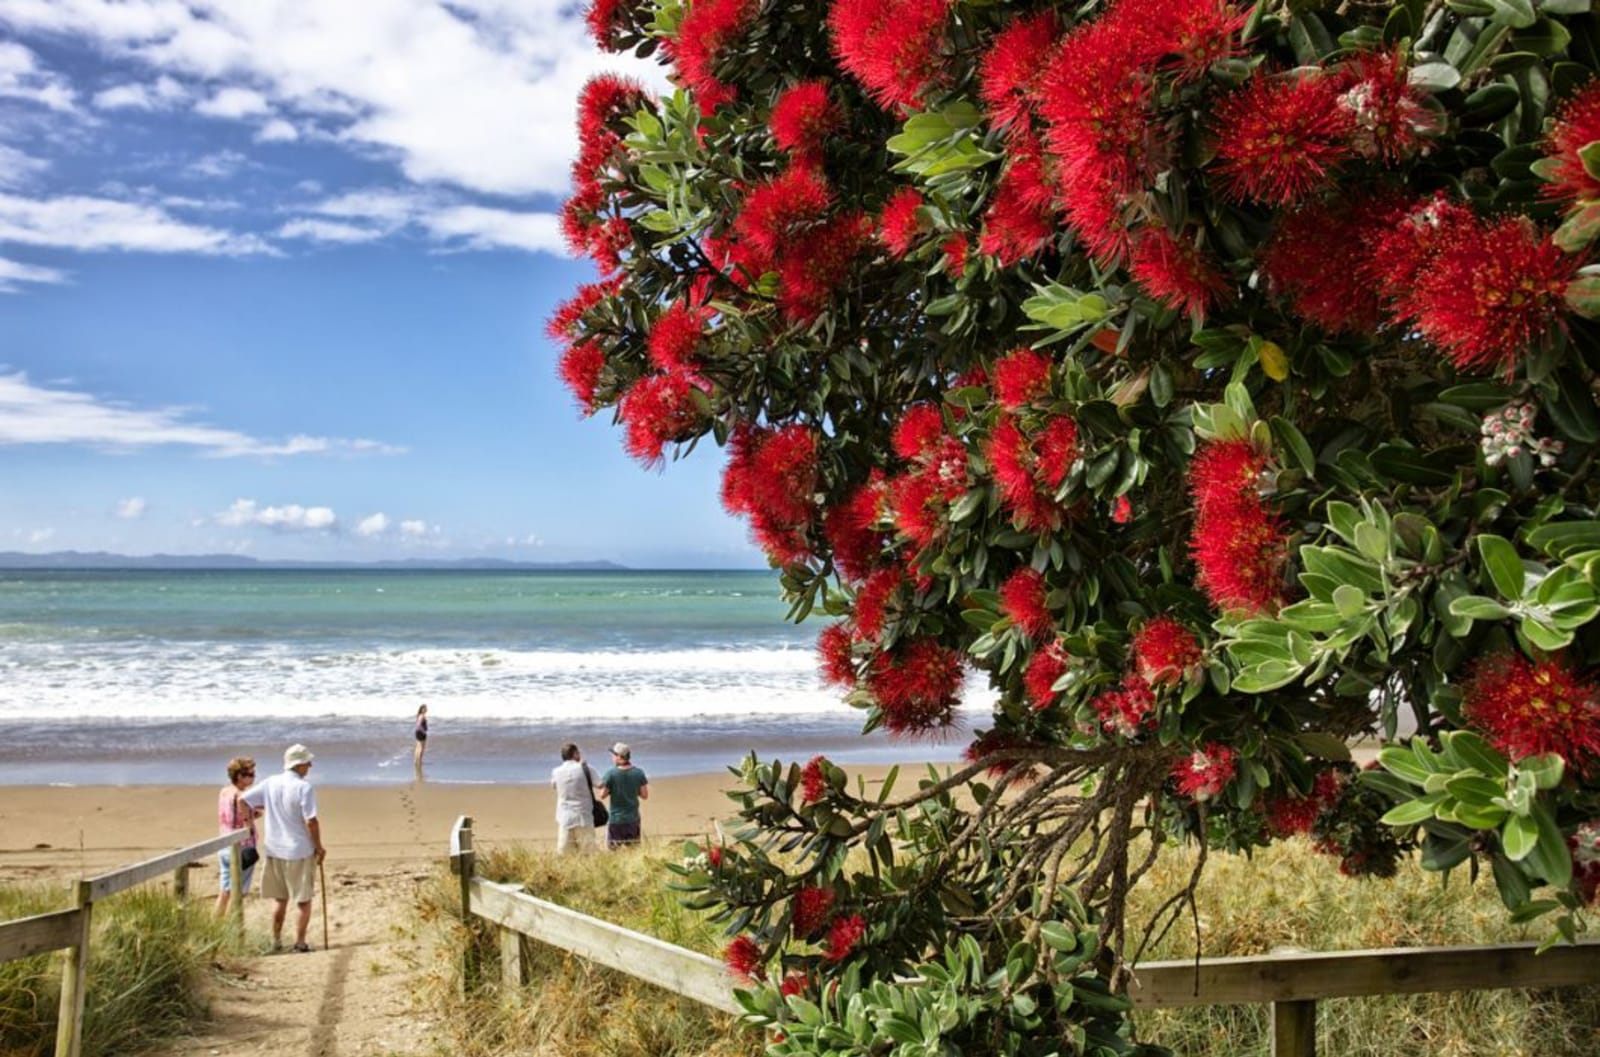 A Pōhutukawa with blazing red flowers at a New Zealand beach